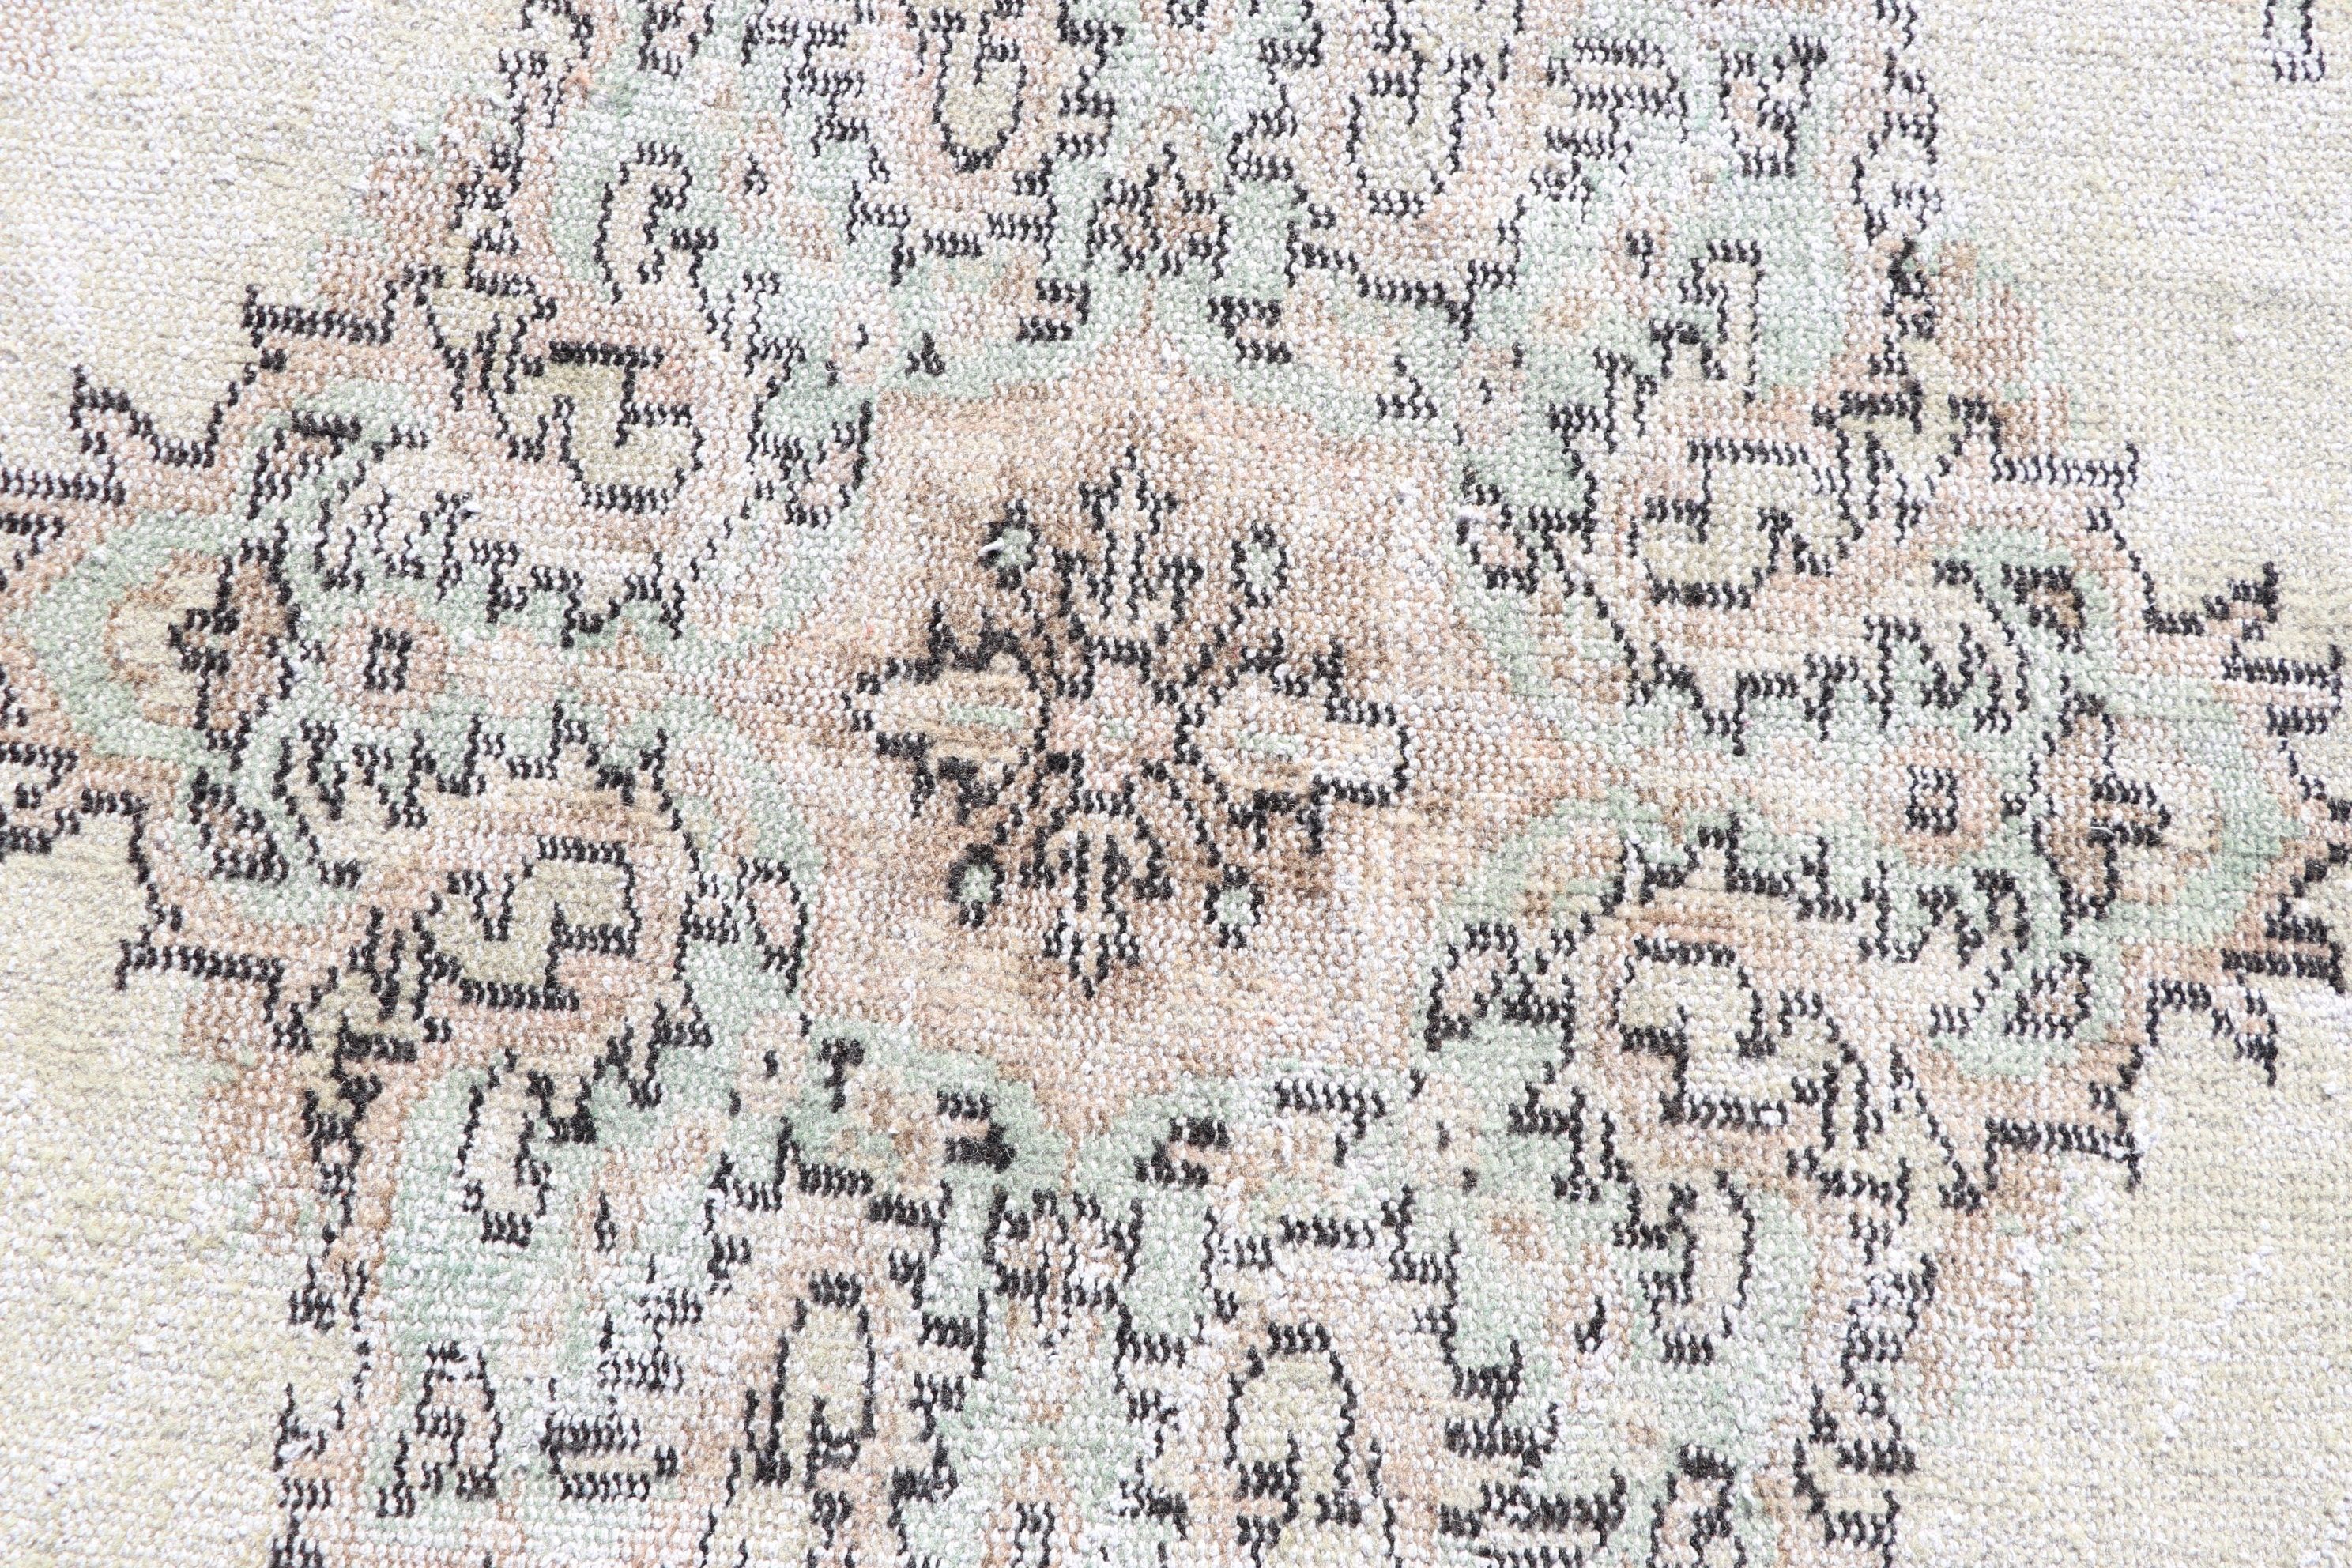 Kitchen Rugs, Entry Rug, Vintage Rug, Natural Rugs, 3.9x3.9 ft Accent Rugs, Bedroom Rugs, Turkish Rugs, Home Decor Rugs, White Floor Rug